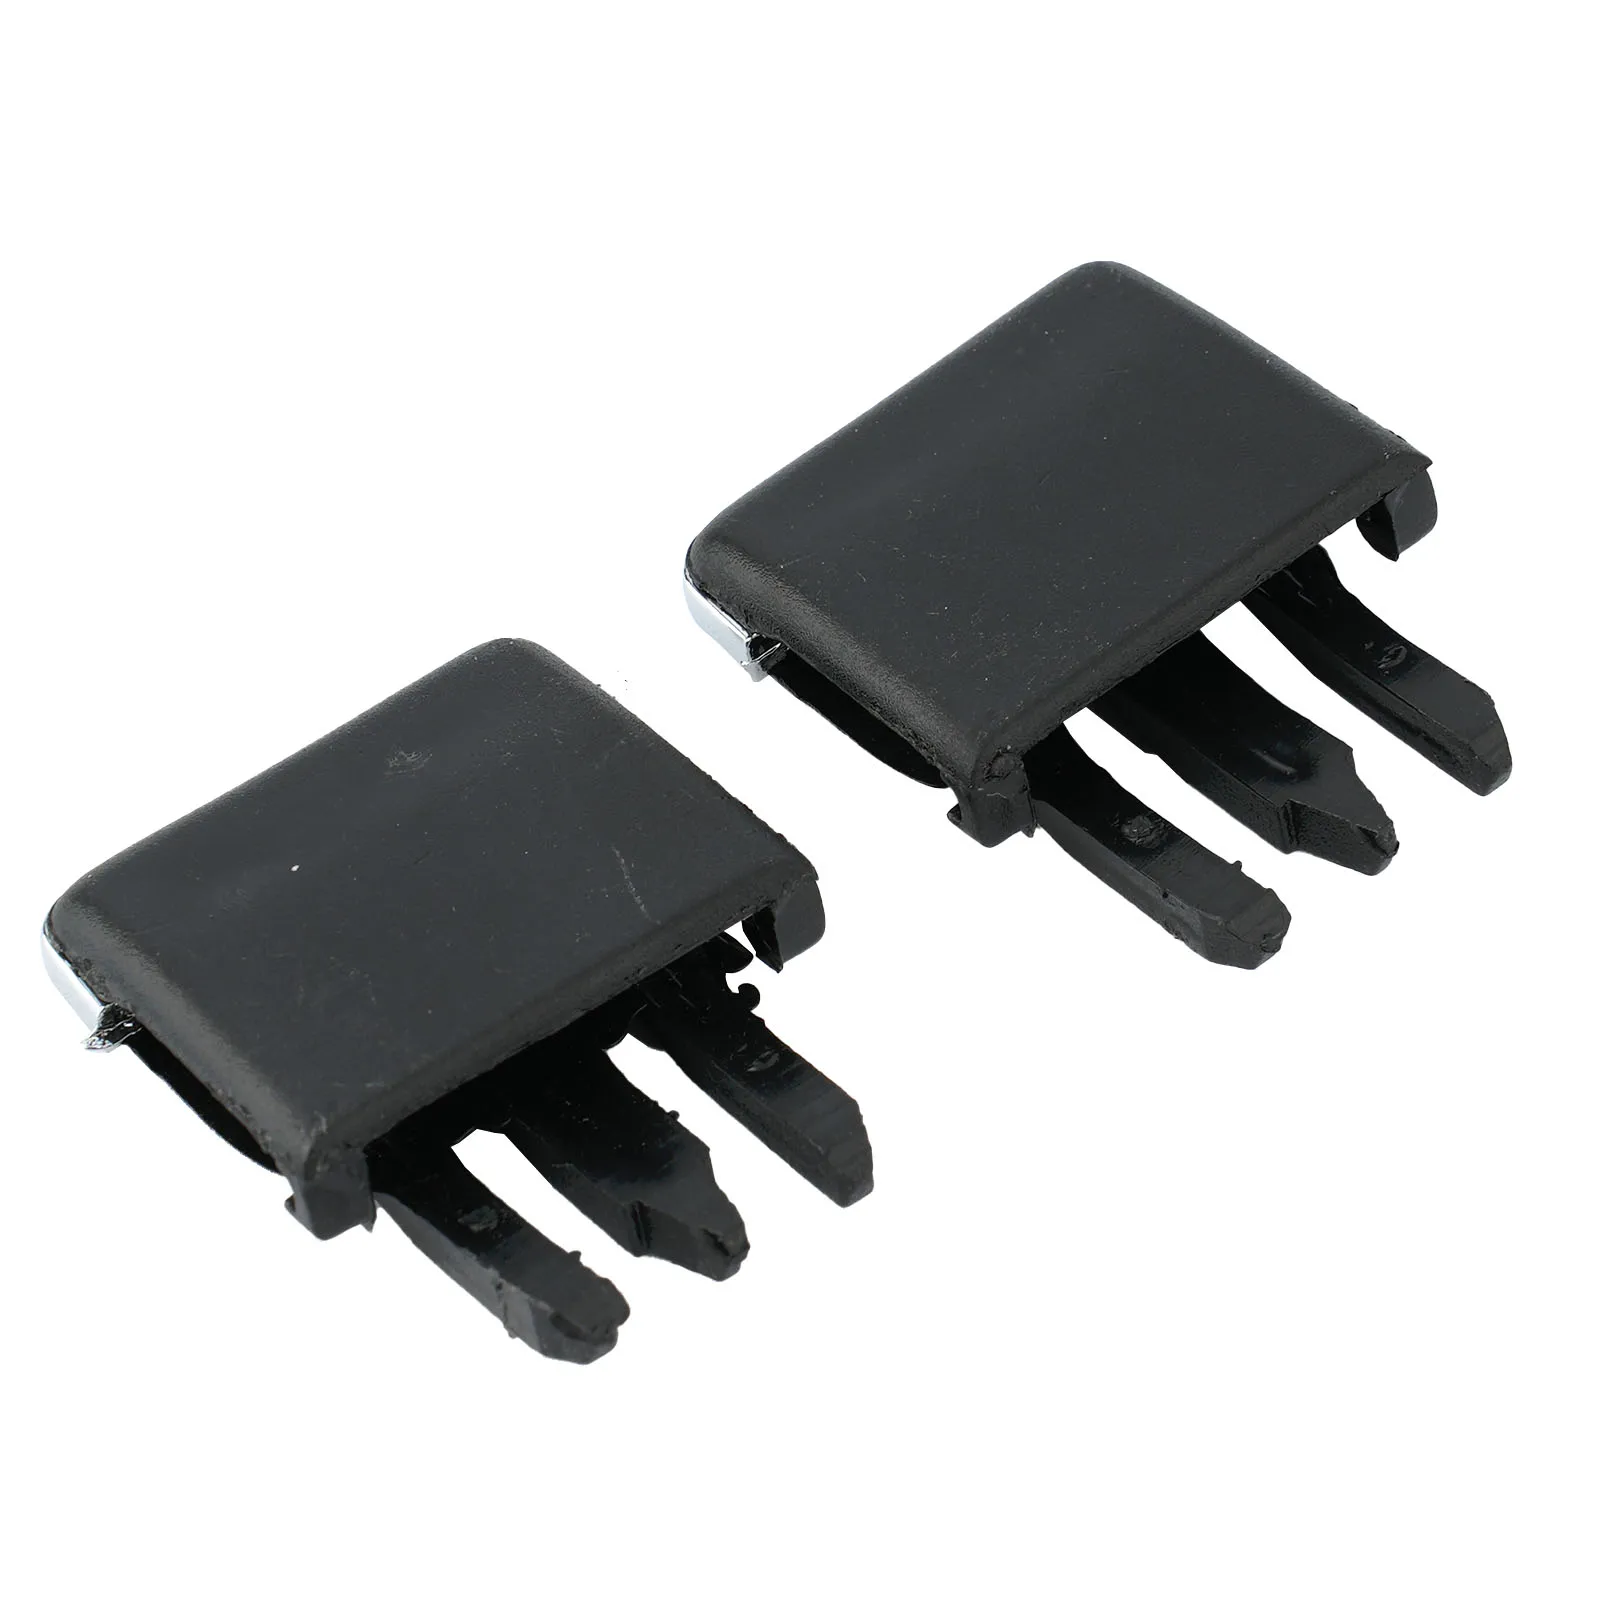 

Durable Useful Brand New Car Clips Air Vent Spare Parts 31.3mm X 34.2mm 8pcs 8x Accessories Black Louvre Blade